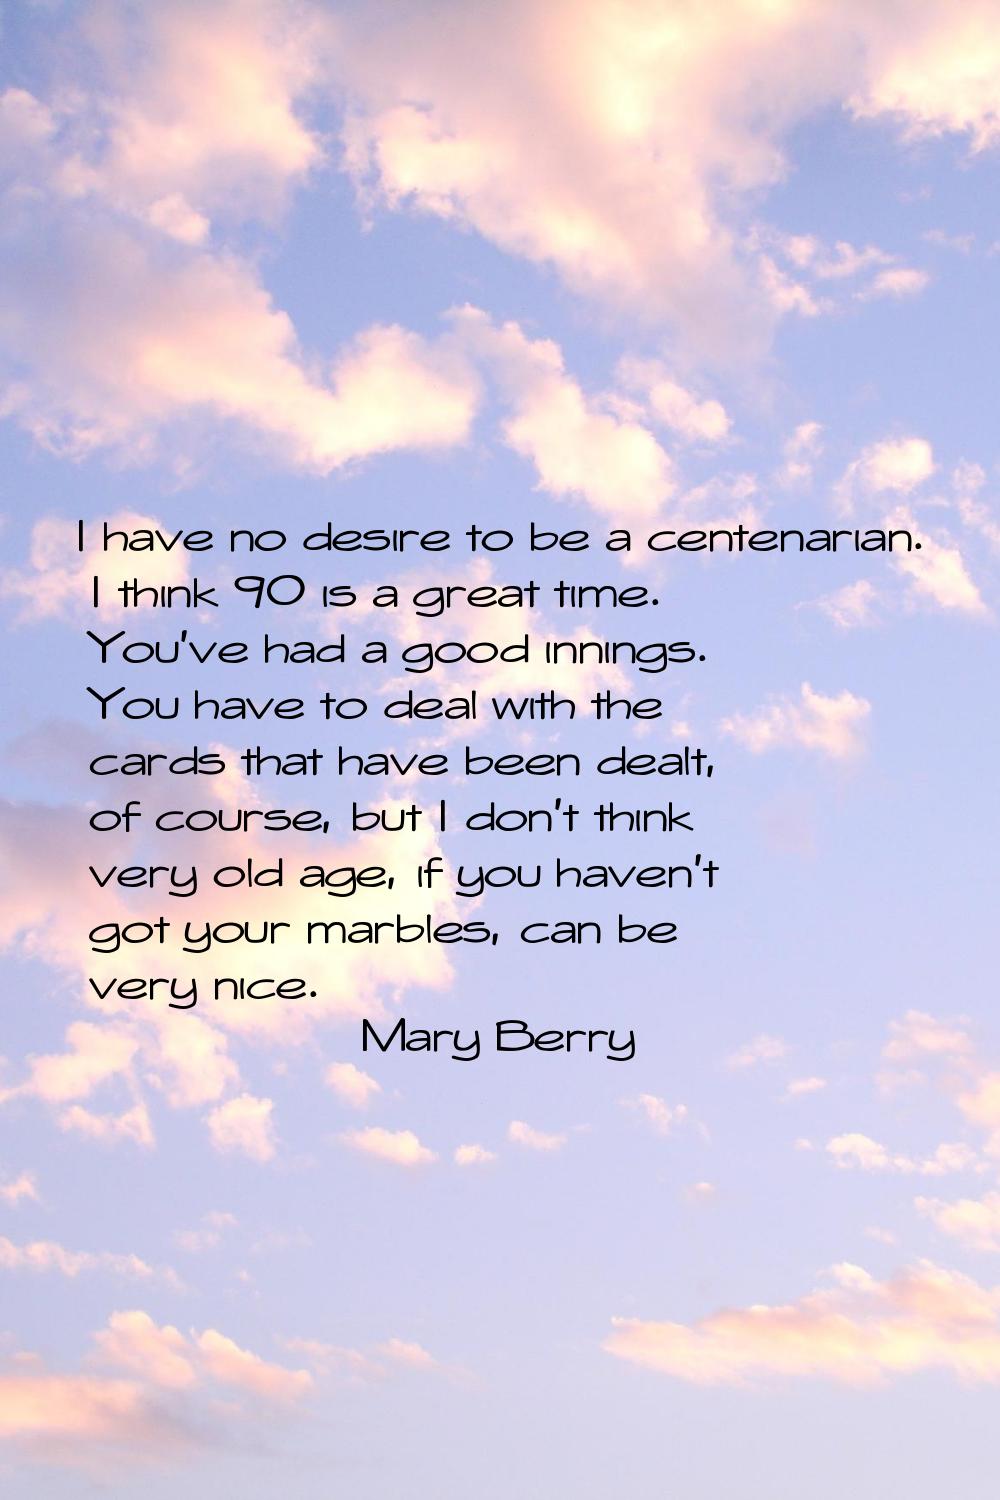 I have no desire to be a centenarian. I think 90 is a great time. You've had a good innings. You ha